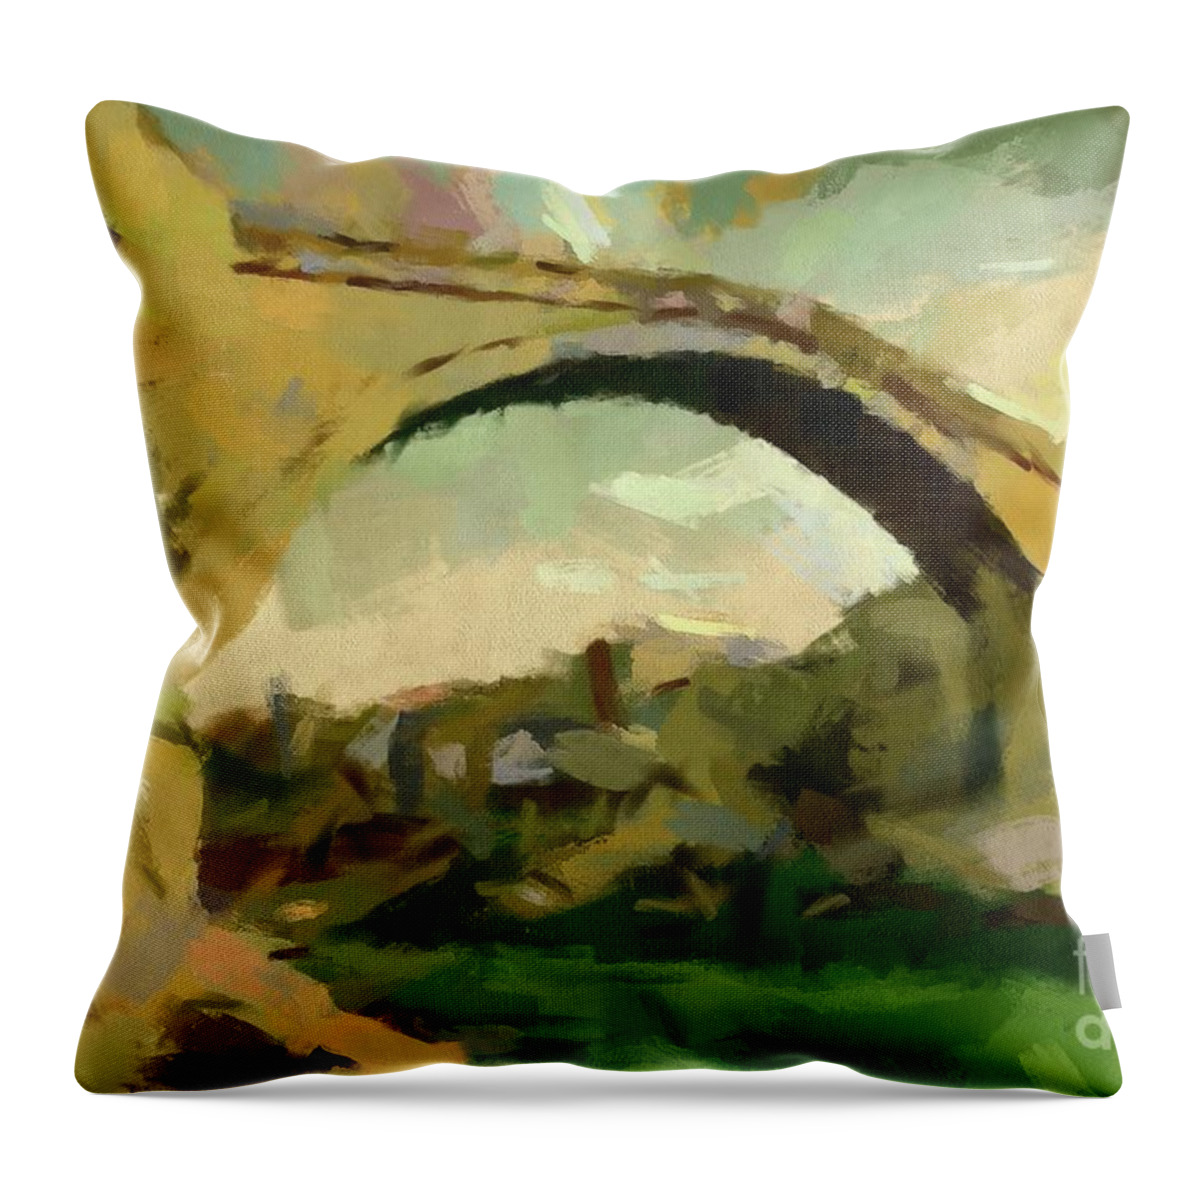 Mostar Throw Pillow featuring the painting Under Old Bridge by Dragica Micki Fortuna